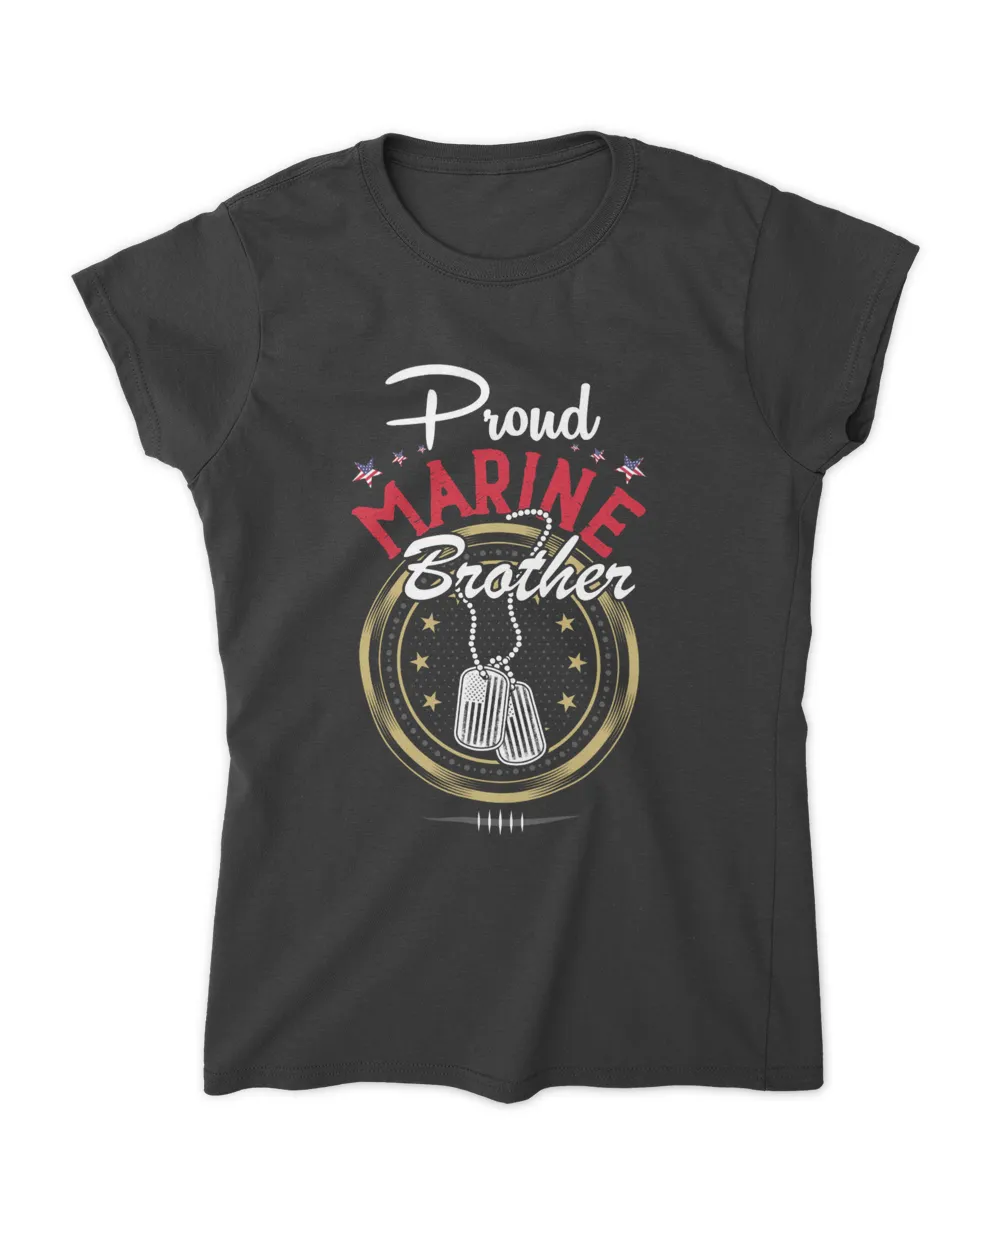 Rearguard Designs Proud Marine Brother shirt